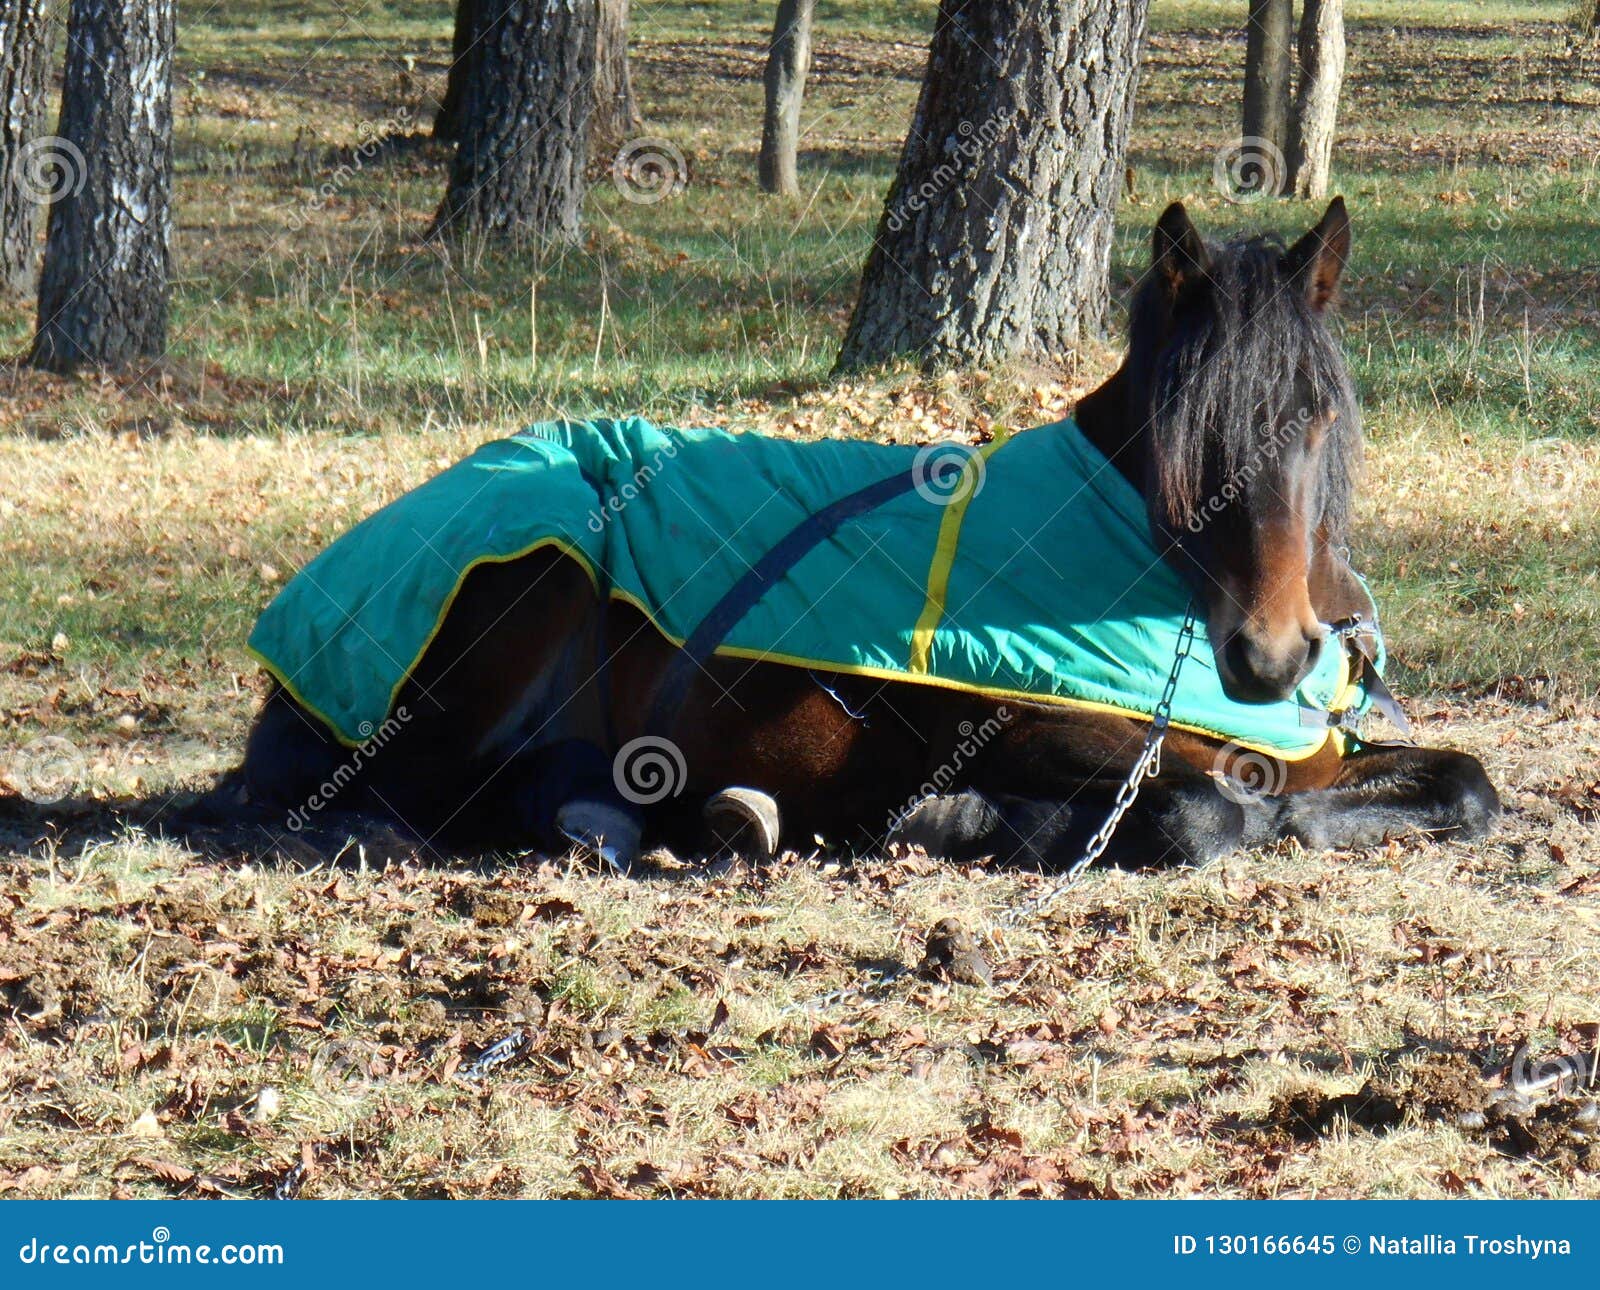 Horse Sleep in the Blanket in the Park Stock Image - Image of horse ...